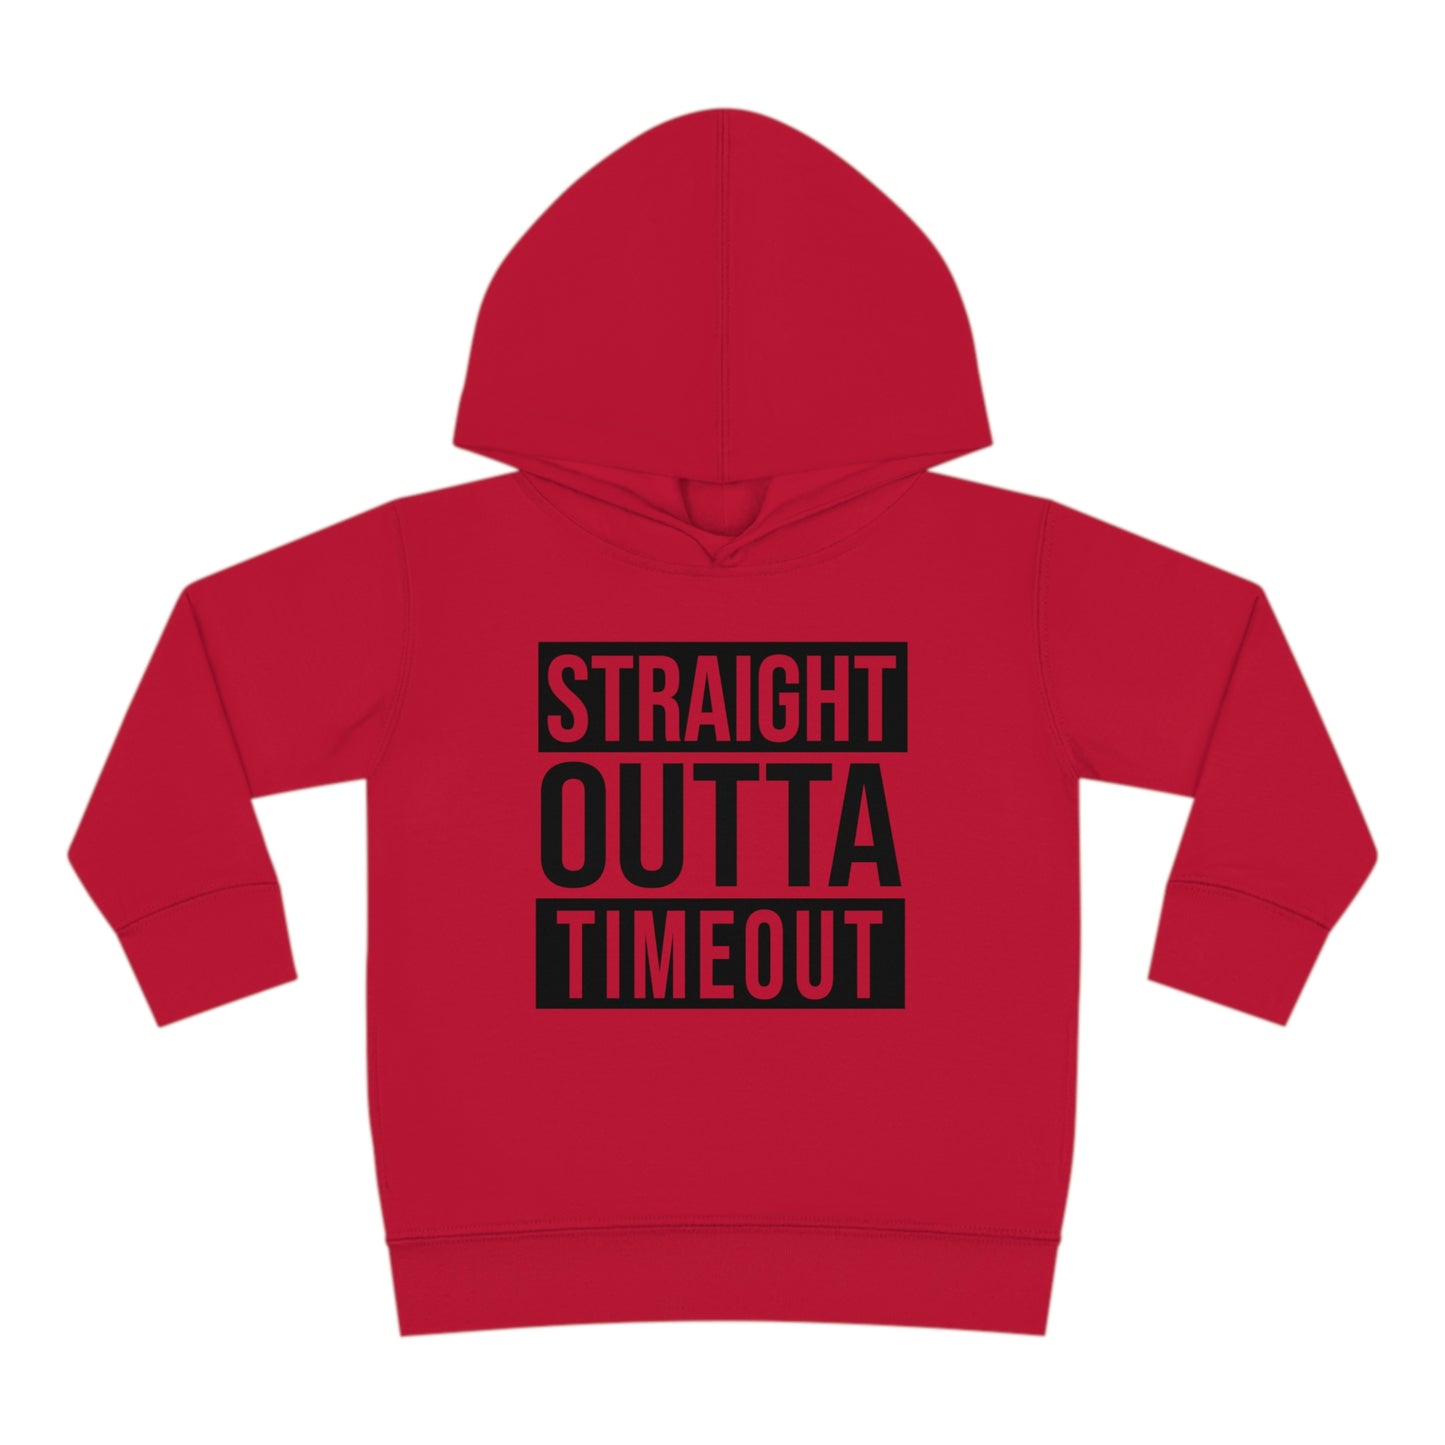 "Straight Outta Timeout" Toddler Pullover Fleece Hoodie (2T-6T)